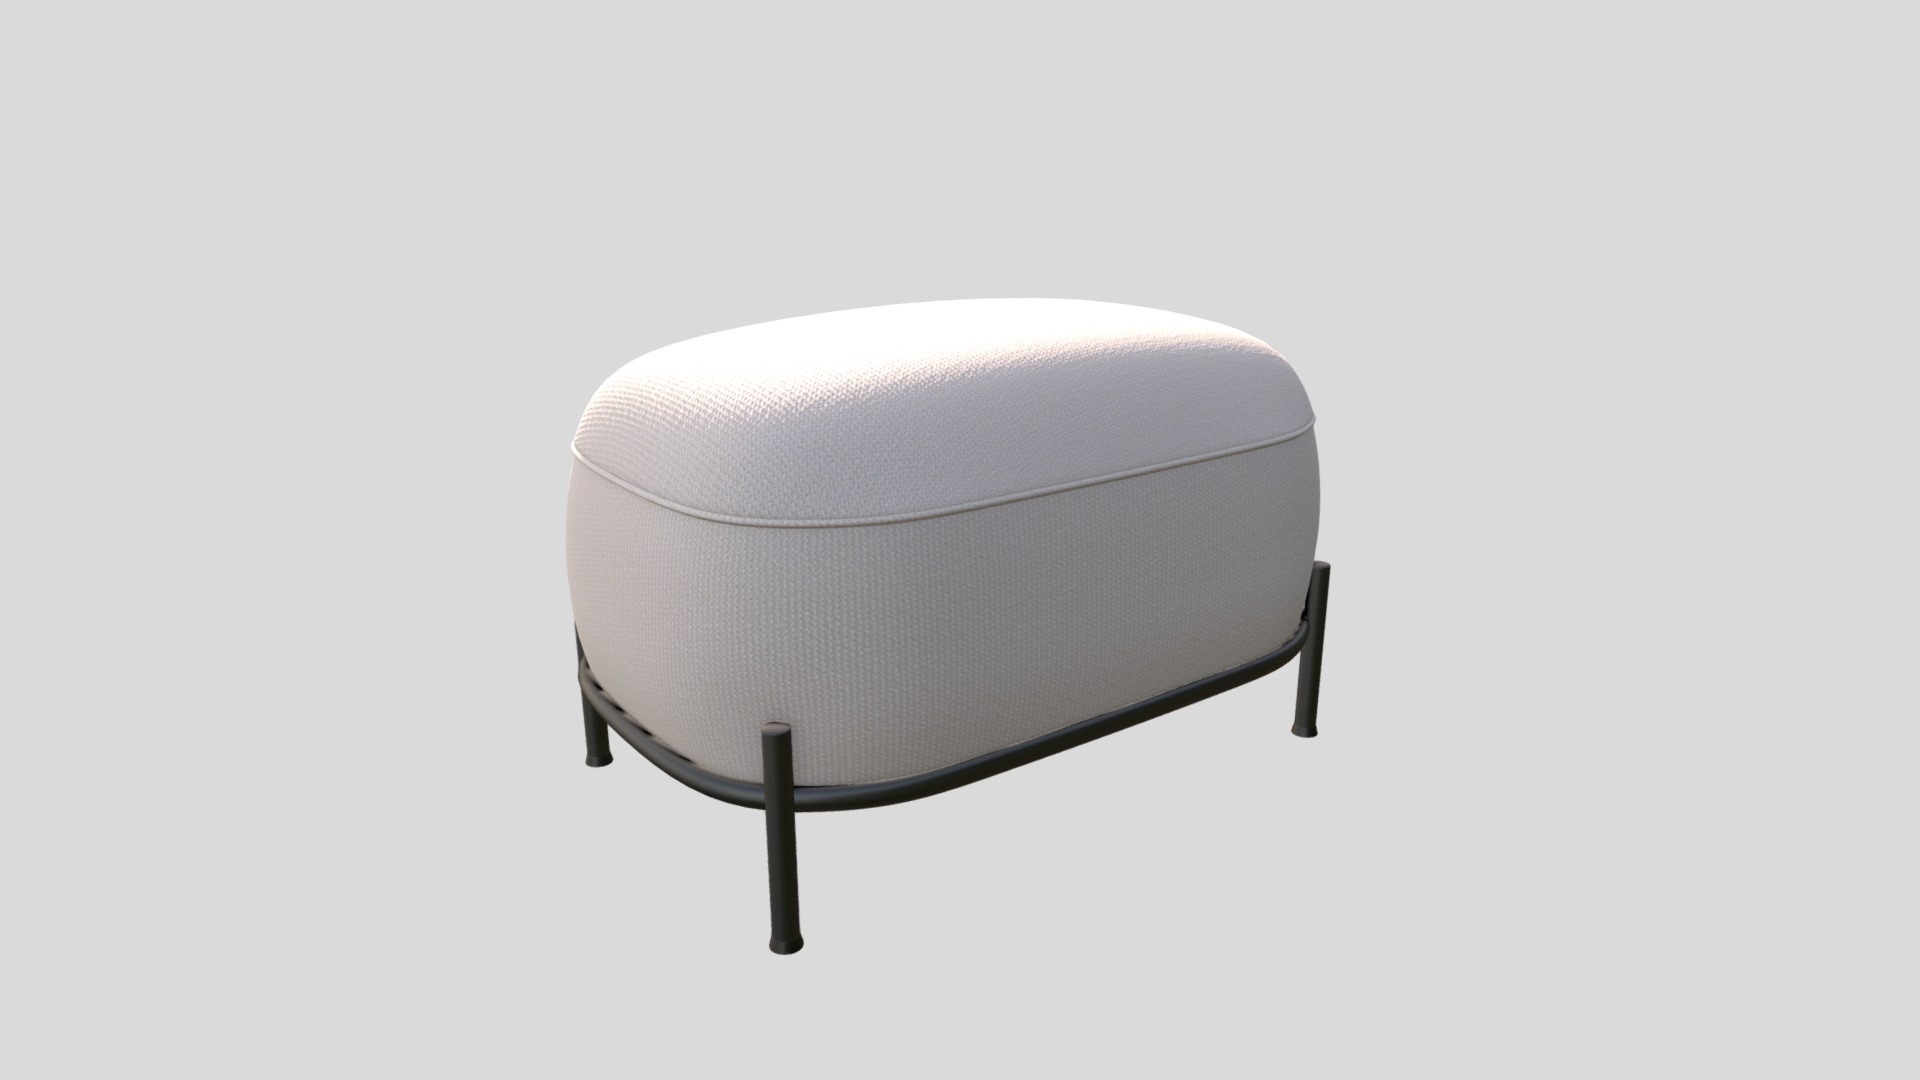 3D model Chairs Puf Sklum Omba - This is a 3D model of the Chairs Puf Sklum Omba. The 3D model is about a round white table.